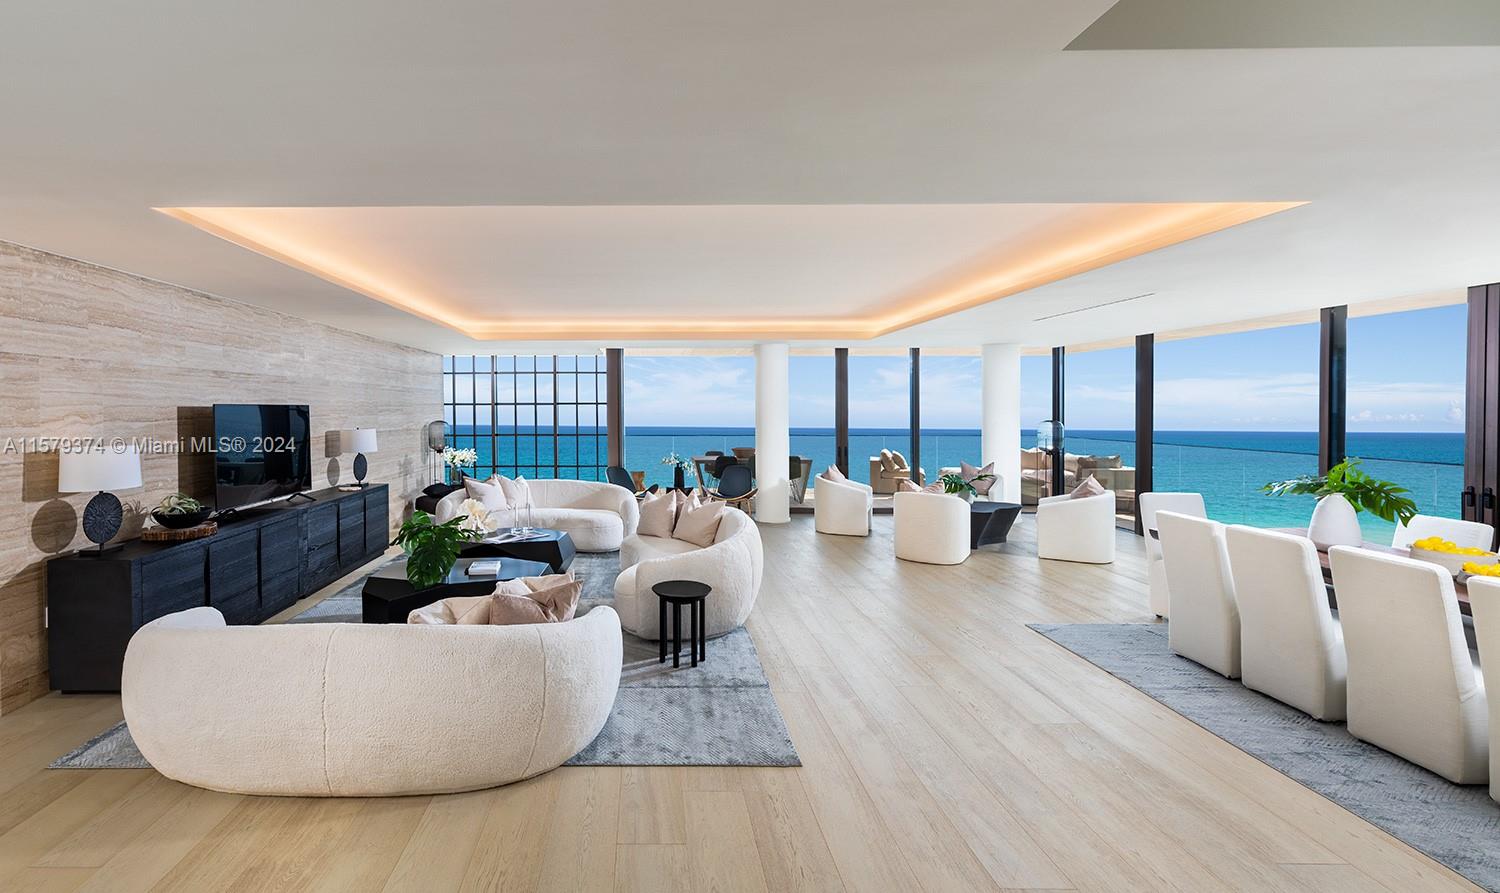 ARTE, a boutique collection of 16 oceanfront residences by Citterio & Viel in collaboration with Kobi Karp. Residence 402 is an exquisitely finished, flow-through 4 bedroom residence, one of the larger residences with 5,184 int sqft, boasting gracious living areas and expansive deep terraces with direct ocean and sunset views. This residence features private elevator with finger recognition entry, gas stove, and temperature-controlled parking. Full service building with rooftop tennis court, outdoor and heated indoor pools, children’s play room and direct beach access.